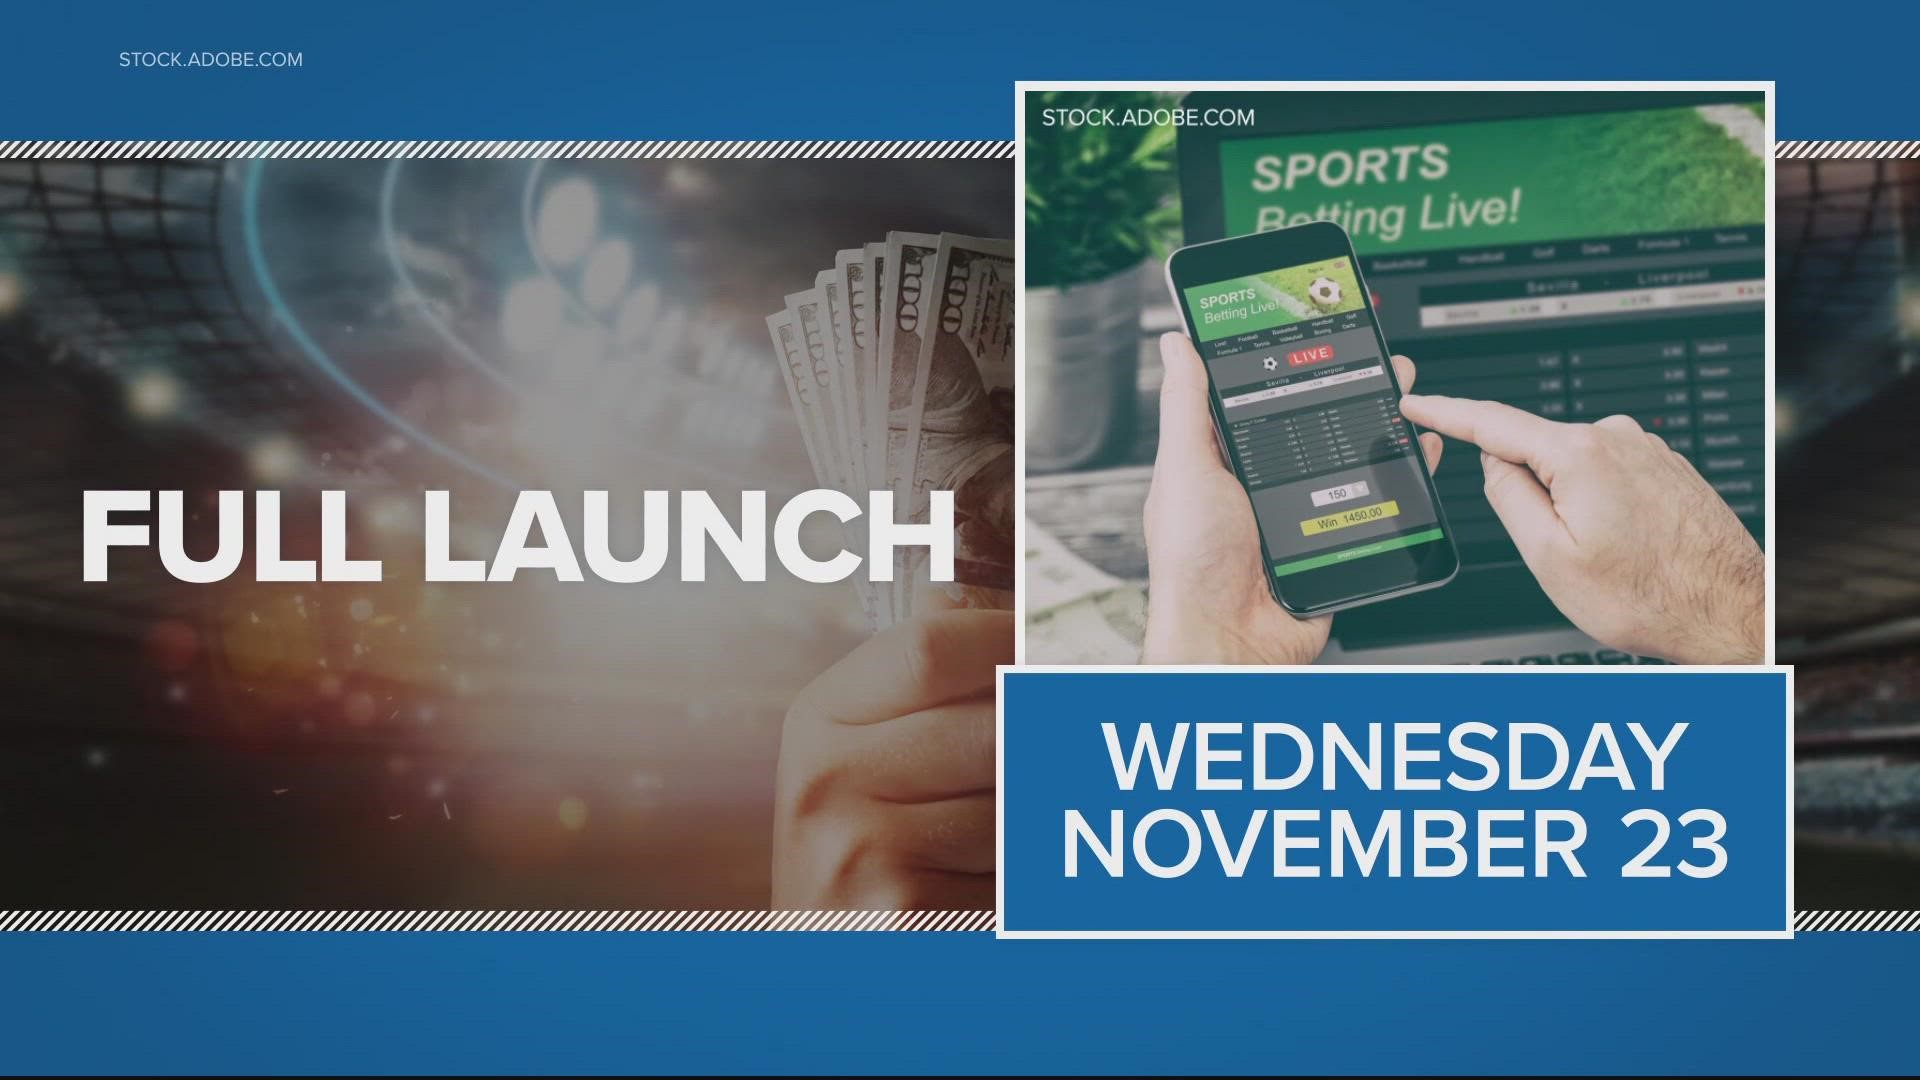 Maryland online sports betting will begin just in time for Thanksgiving football. It's set to launch as early as Monday.